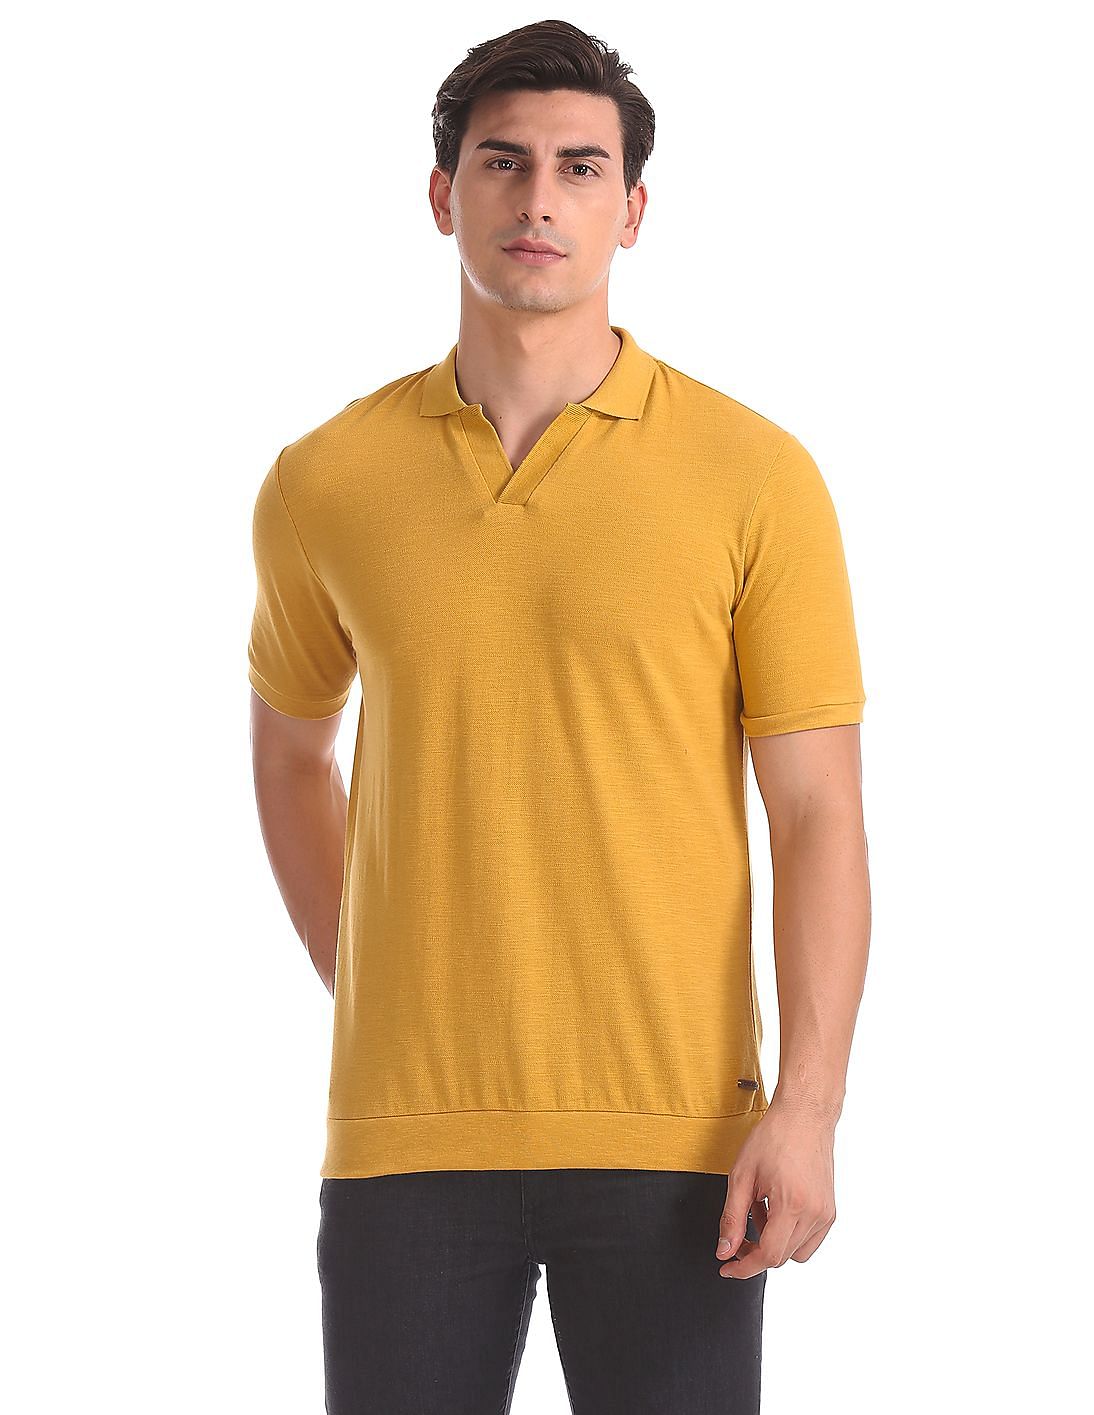 Exciting Offer | Men's Polo T- Shirts Under Rs.499 Only